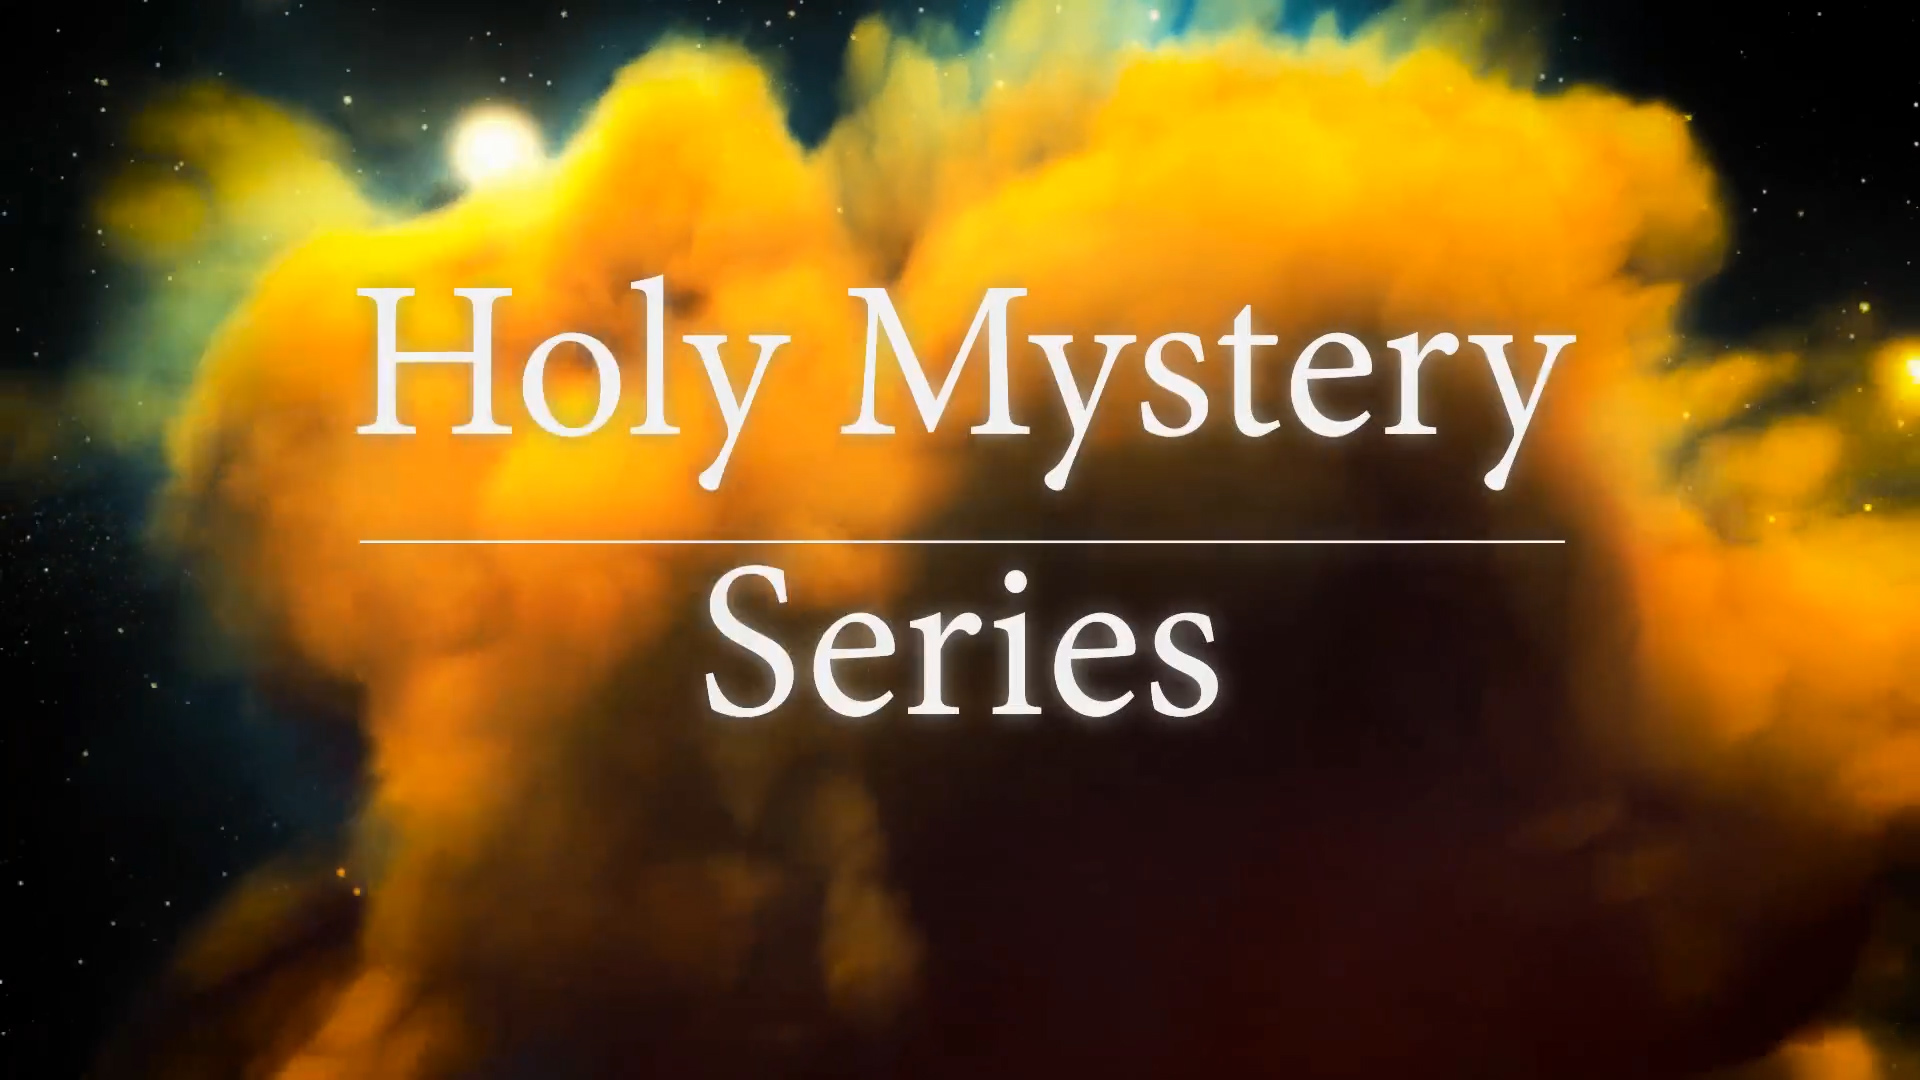 Screen shot of online video series "Holy Mystery"